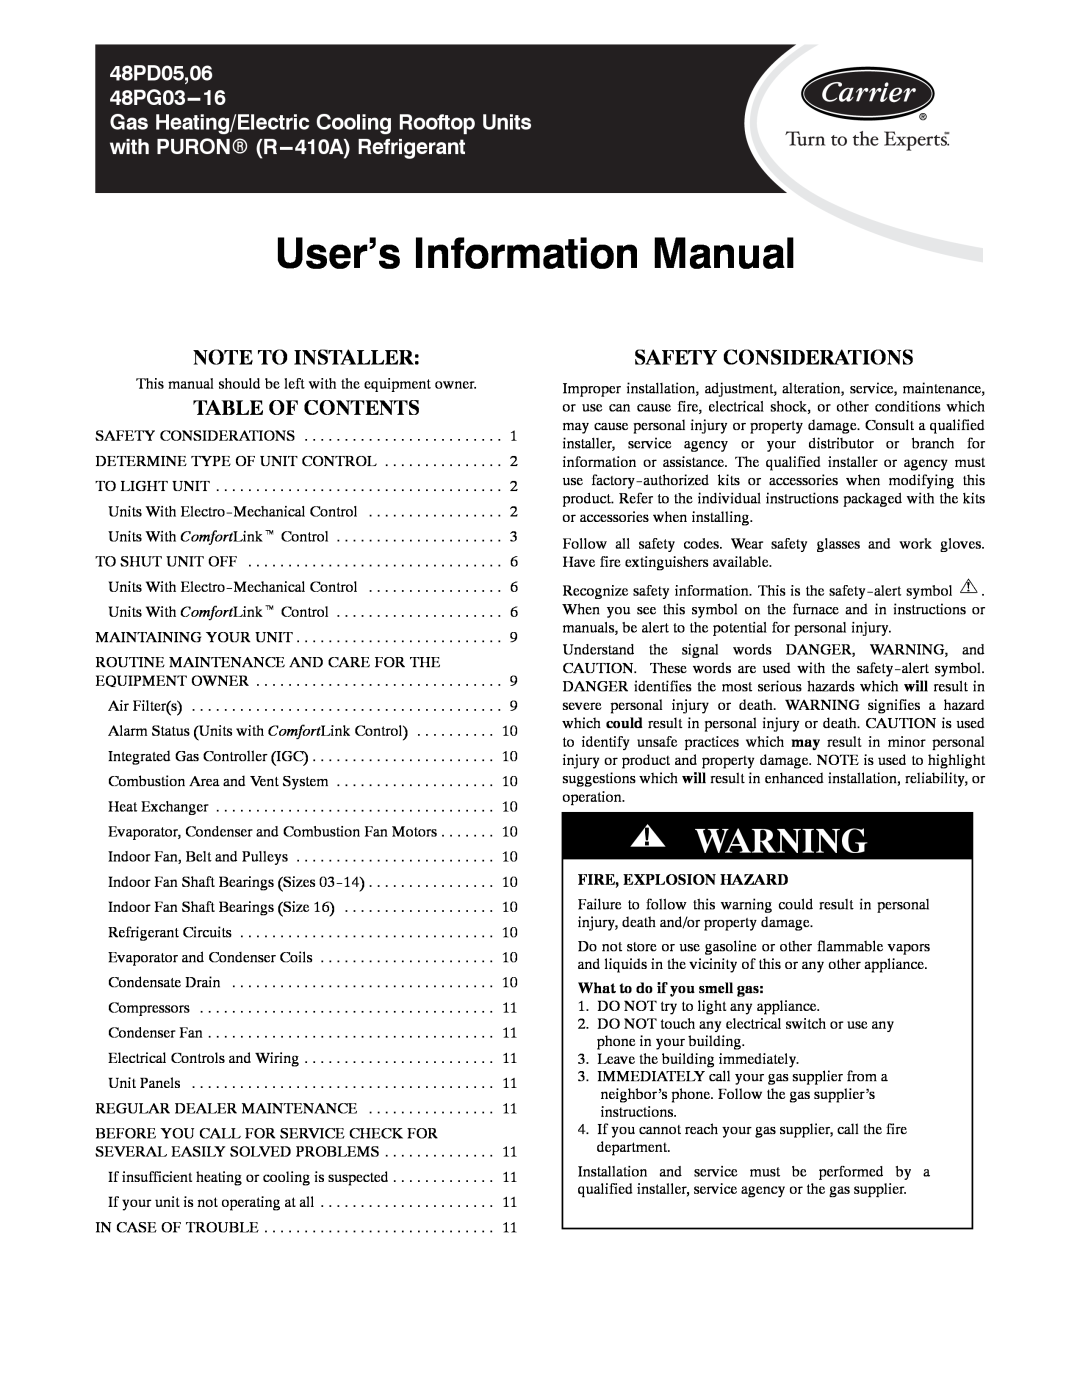 Carrier 06, 48PD05 manual Note To Installer, Table Of Contents, Safety Considerations, User’s Information Manual 